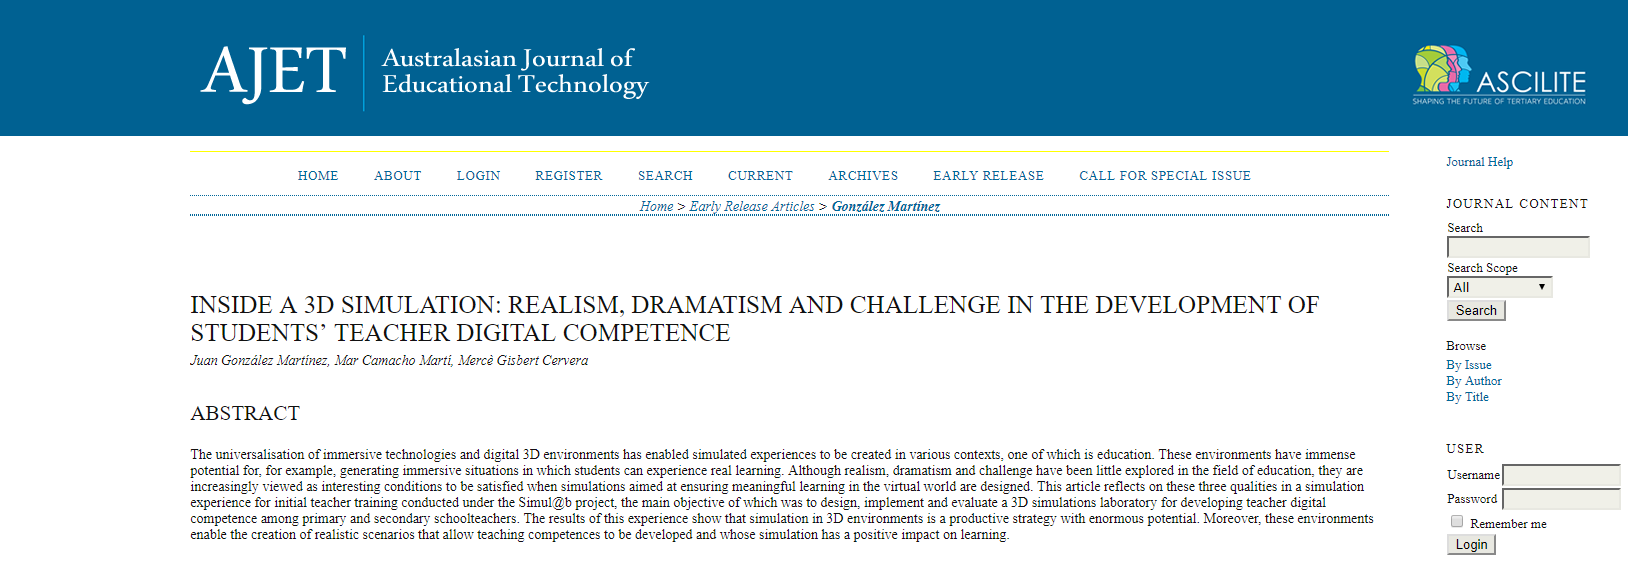 NEW PUBLICATION IN Australasian Journal of Educational Technology